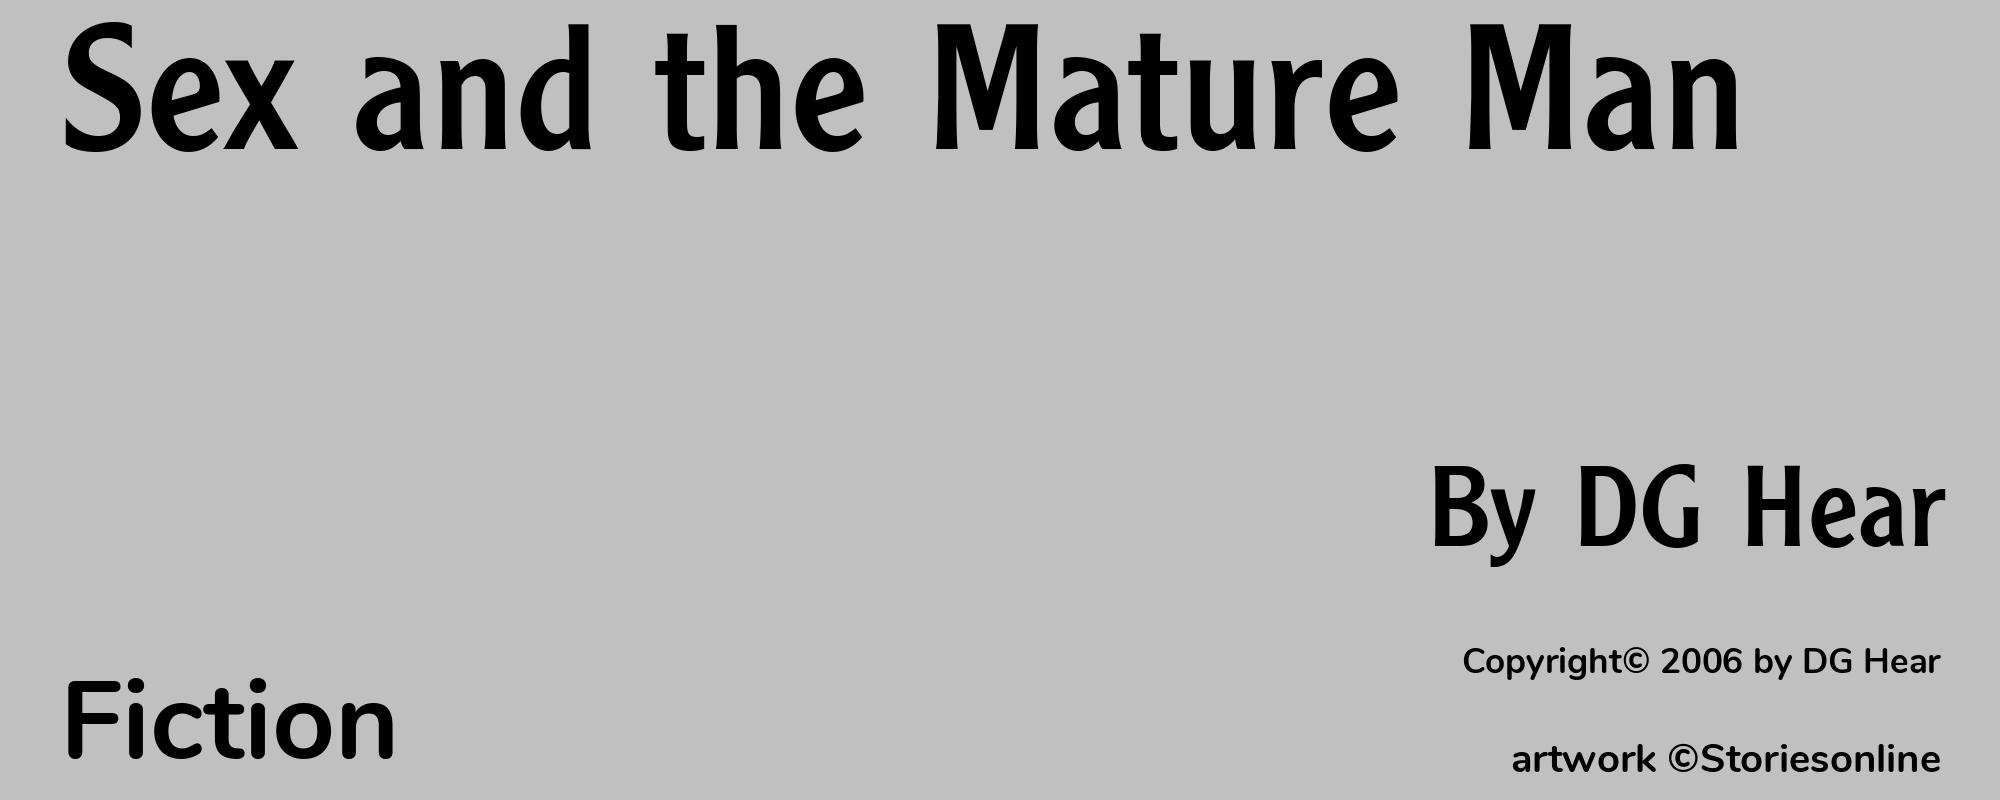 Sex and the Mature Man - Cover